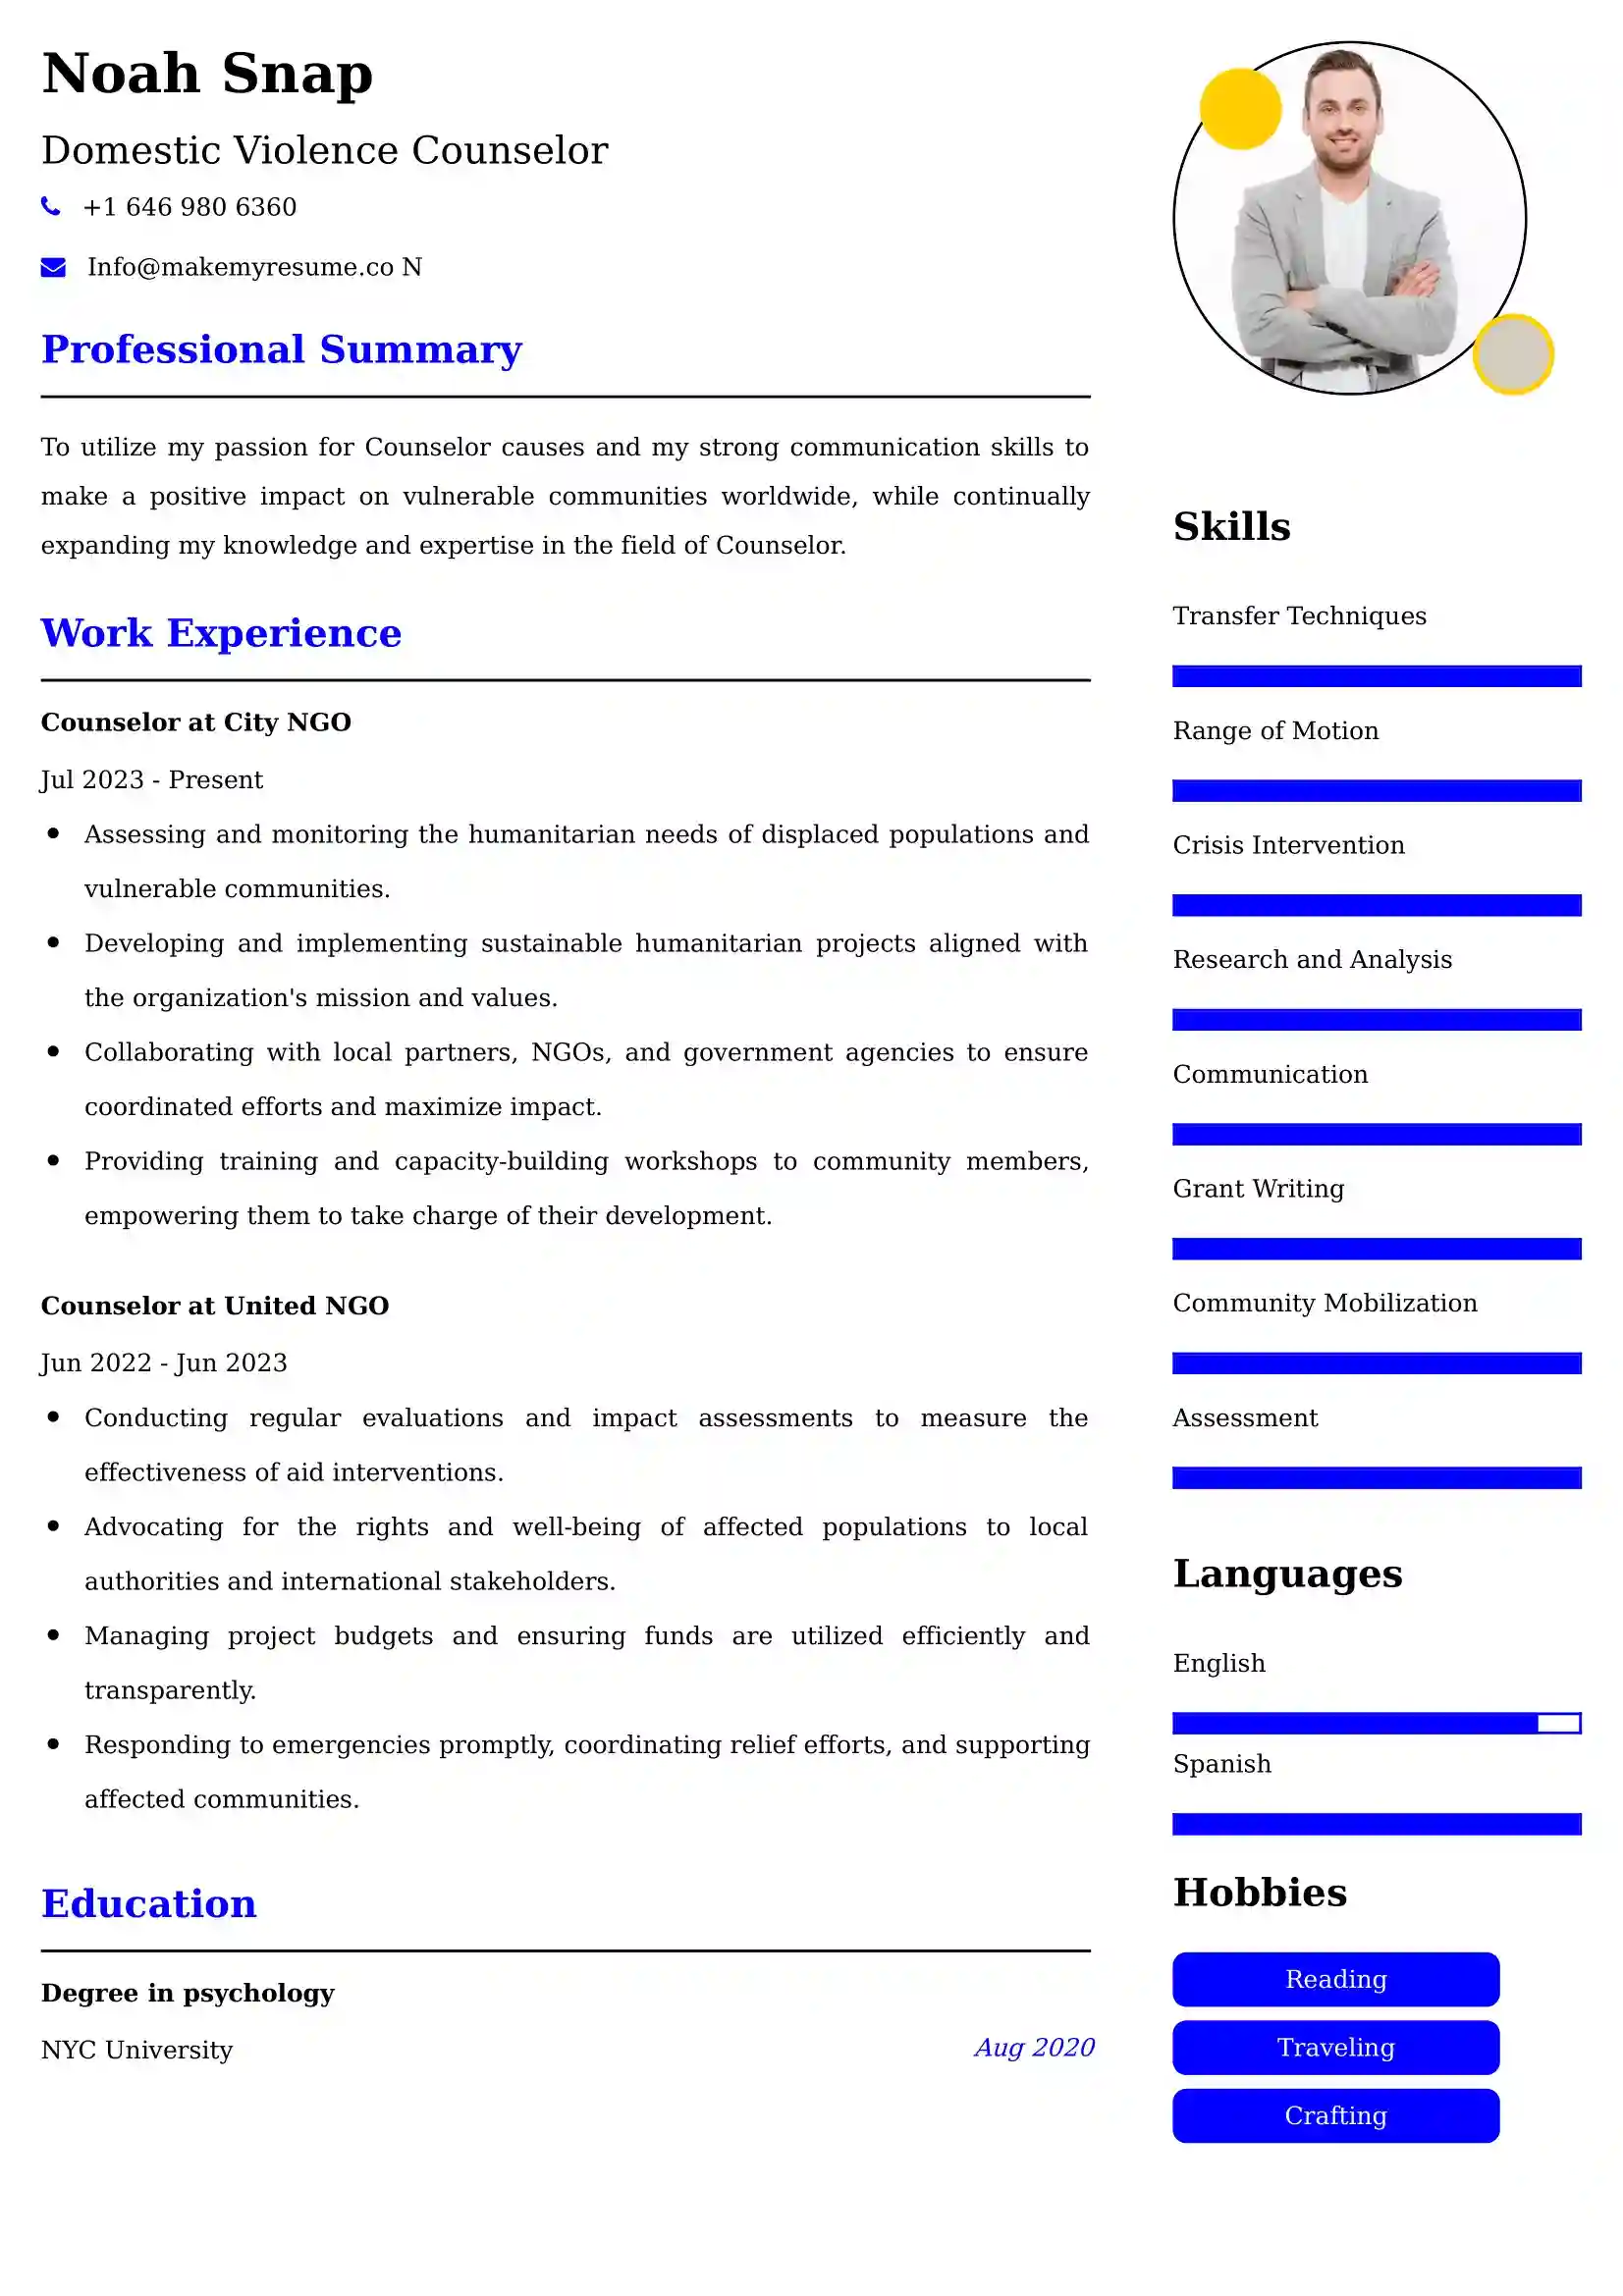 Counselor CV Examples - US Format